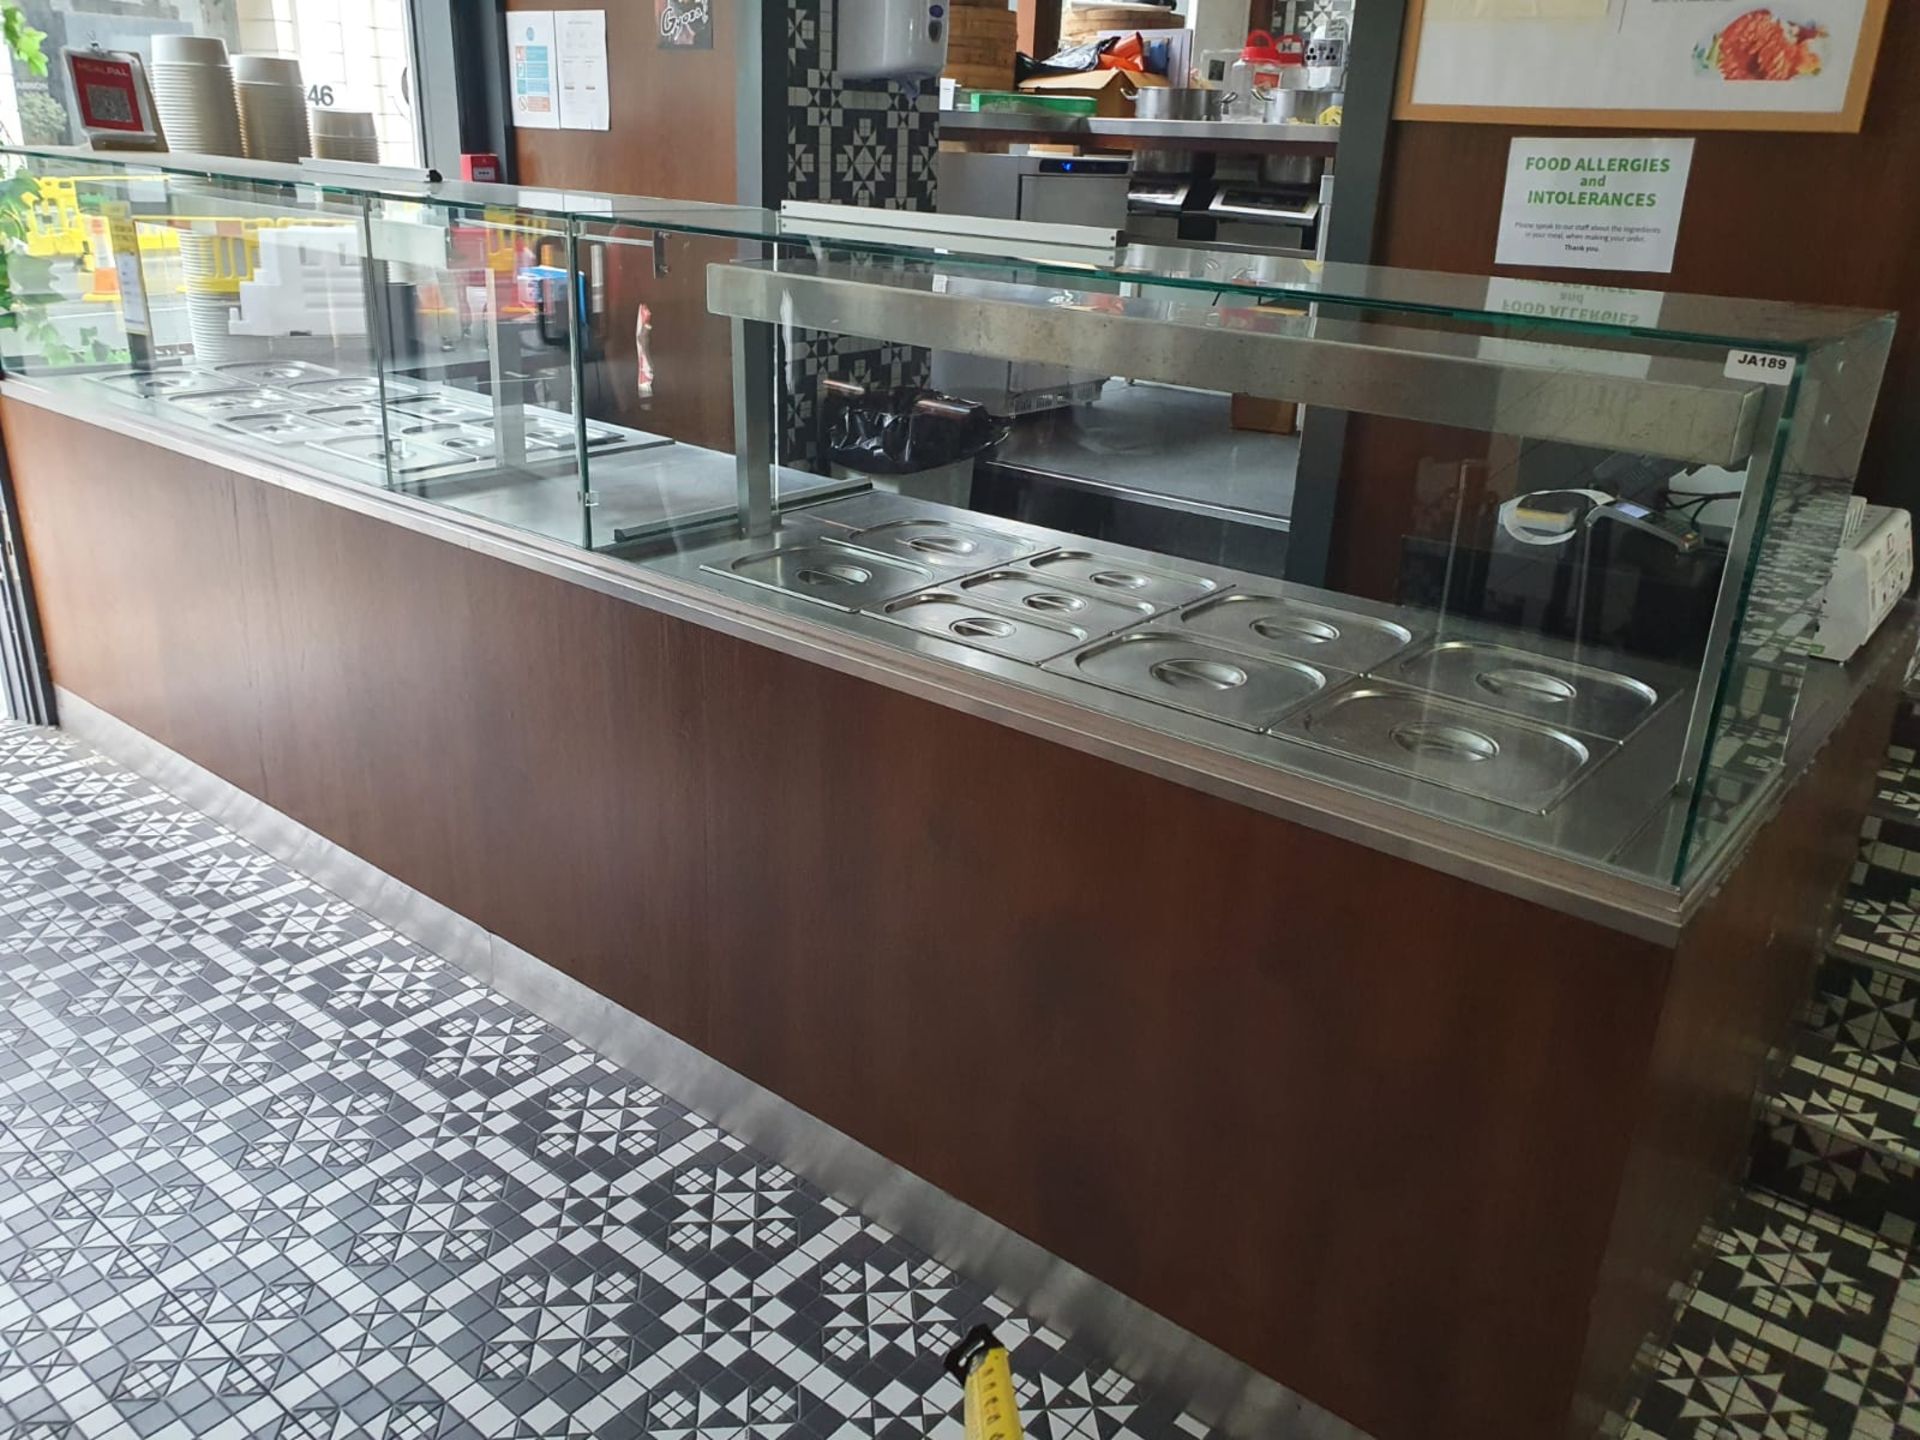 1 x Contemporary Restaurant Service Counter With Walnut Finish, Two Diamond Bain Marie Food - Image 2 of 25